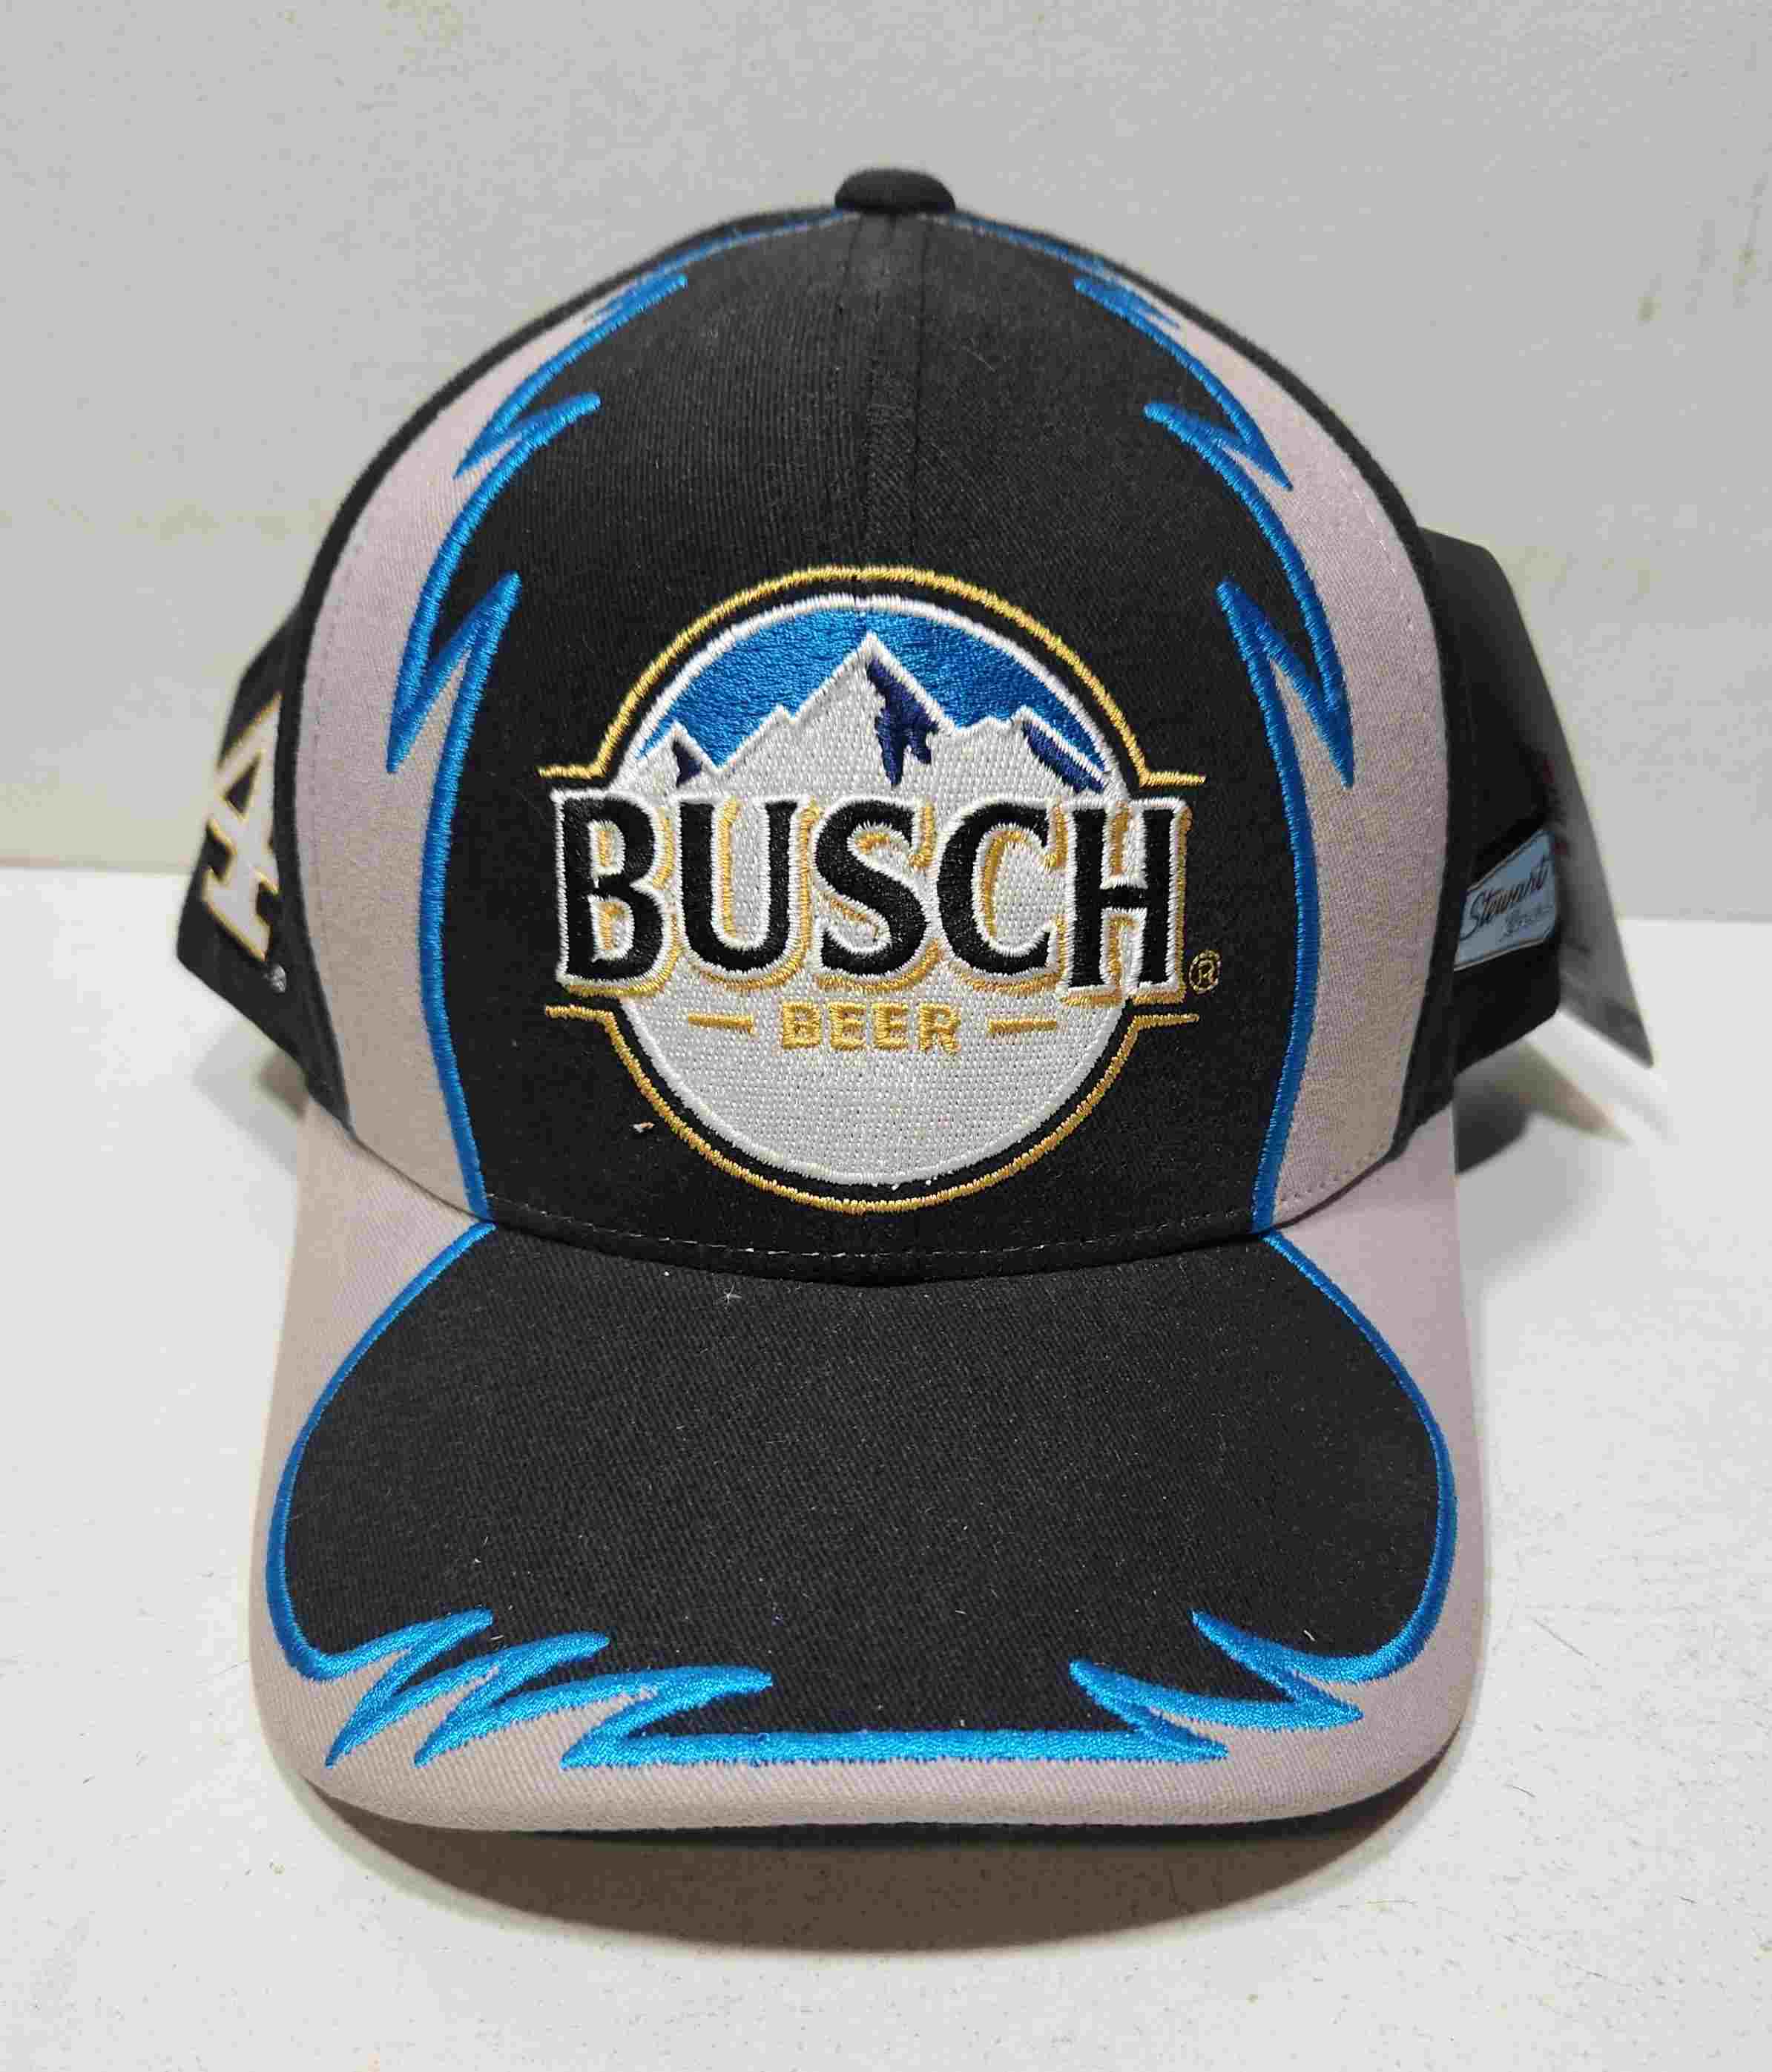 2018 Kevin Harvick Busch Beer "Jagged" hat